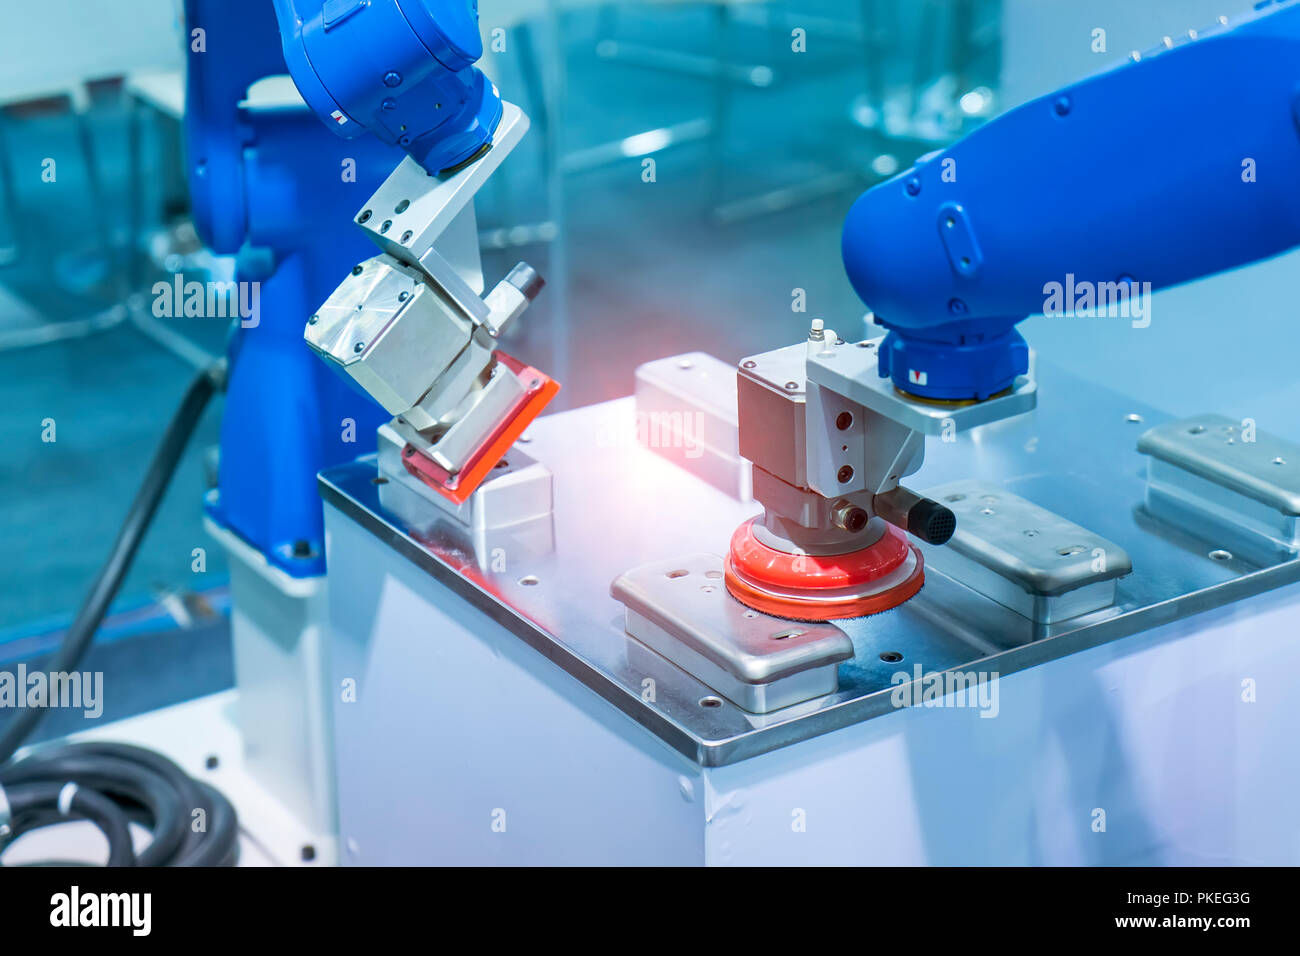 Industrial robot working in phone factory Stock Photo